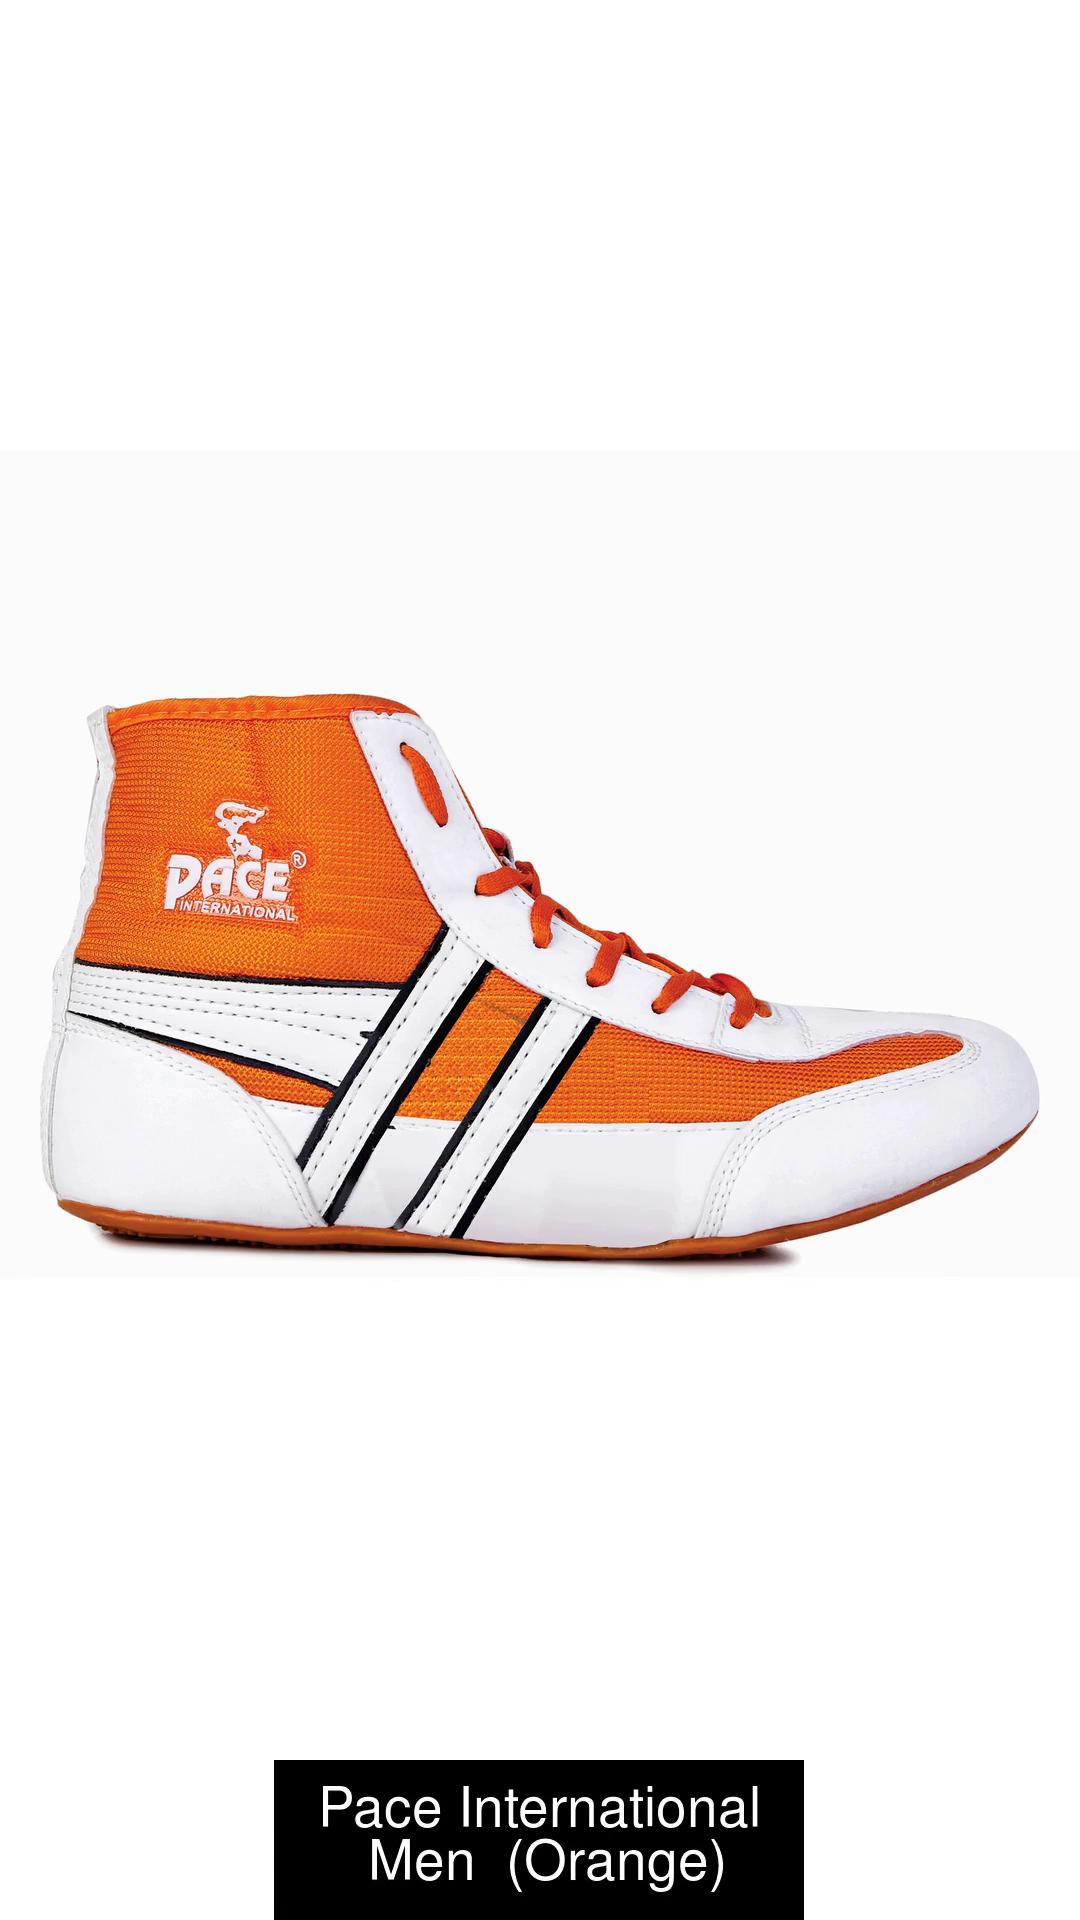 Kabaddi Mat Shoes in Best Price. Contact Us - +919416579073 or  +919416579073 Pama Kabaddi Shoes, Pace international kabaddi shoes, Se